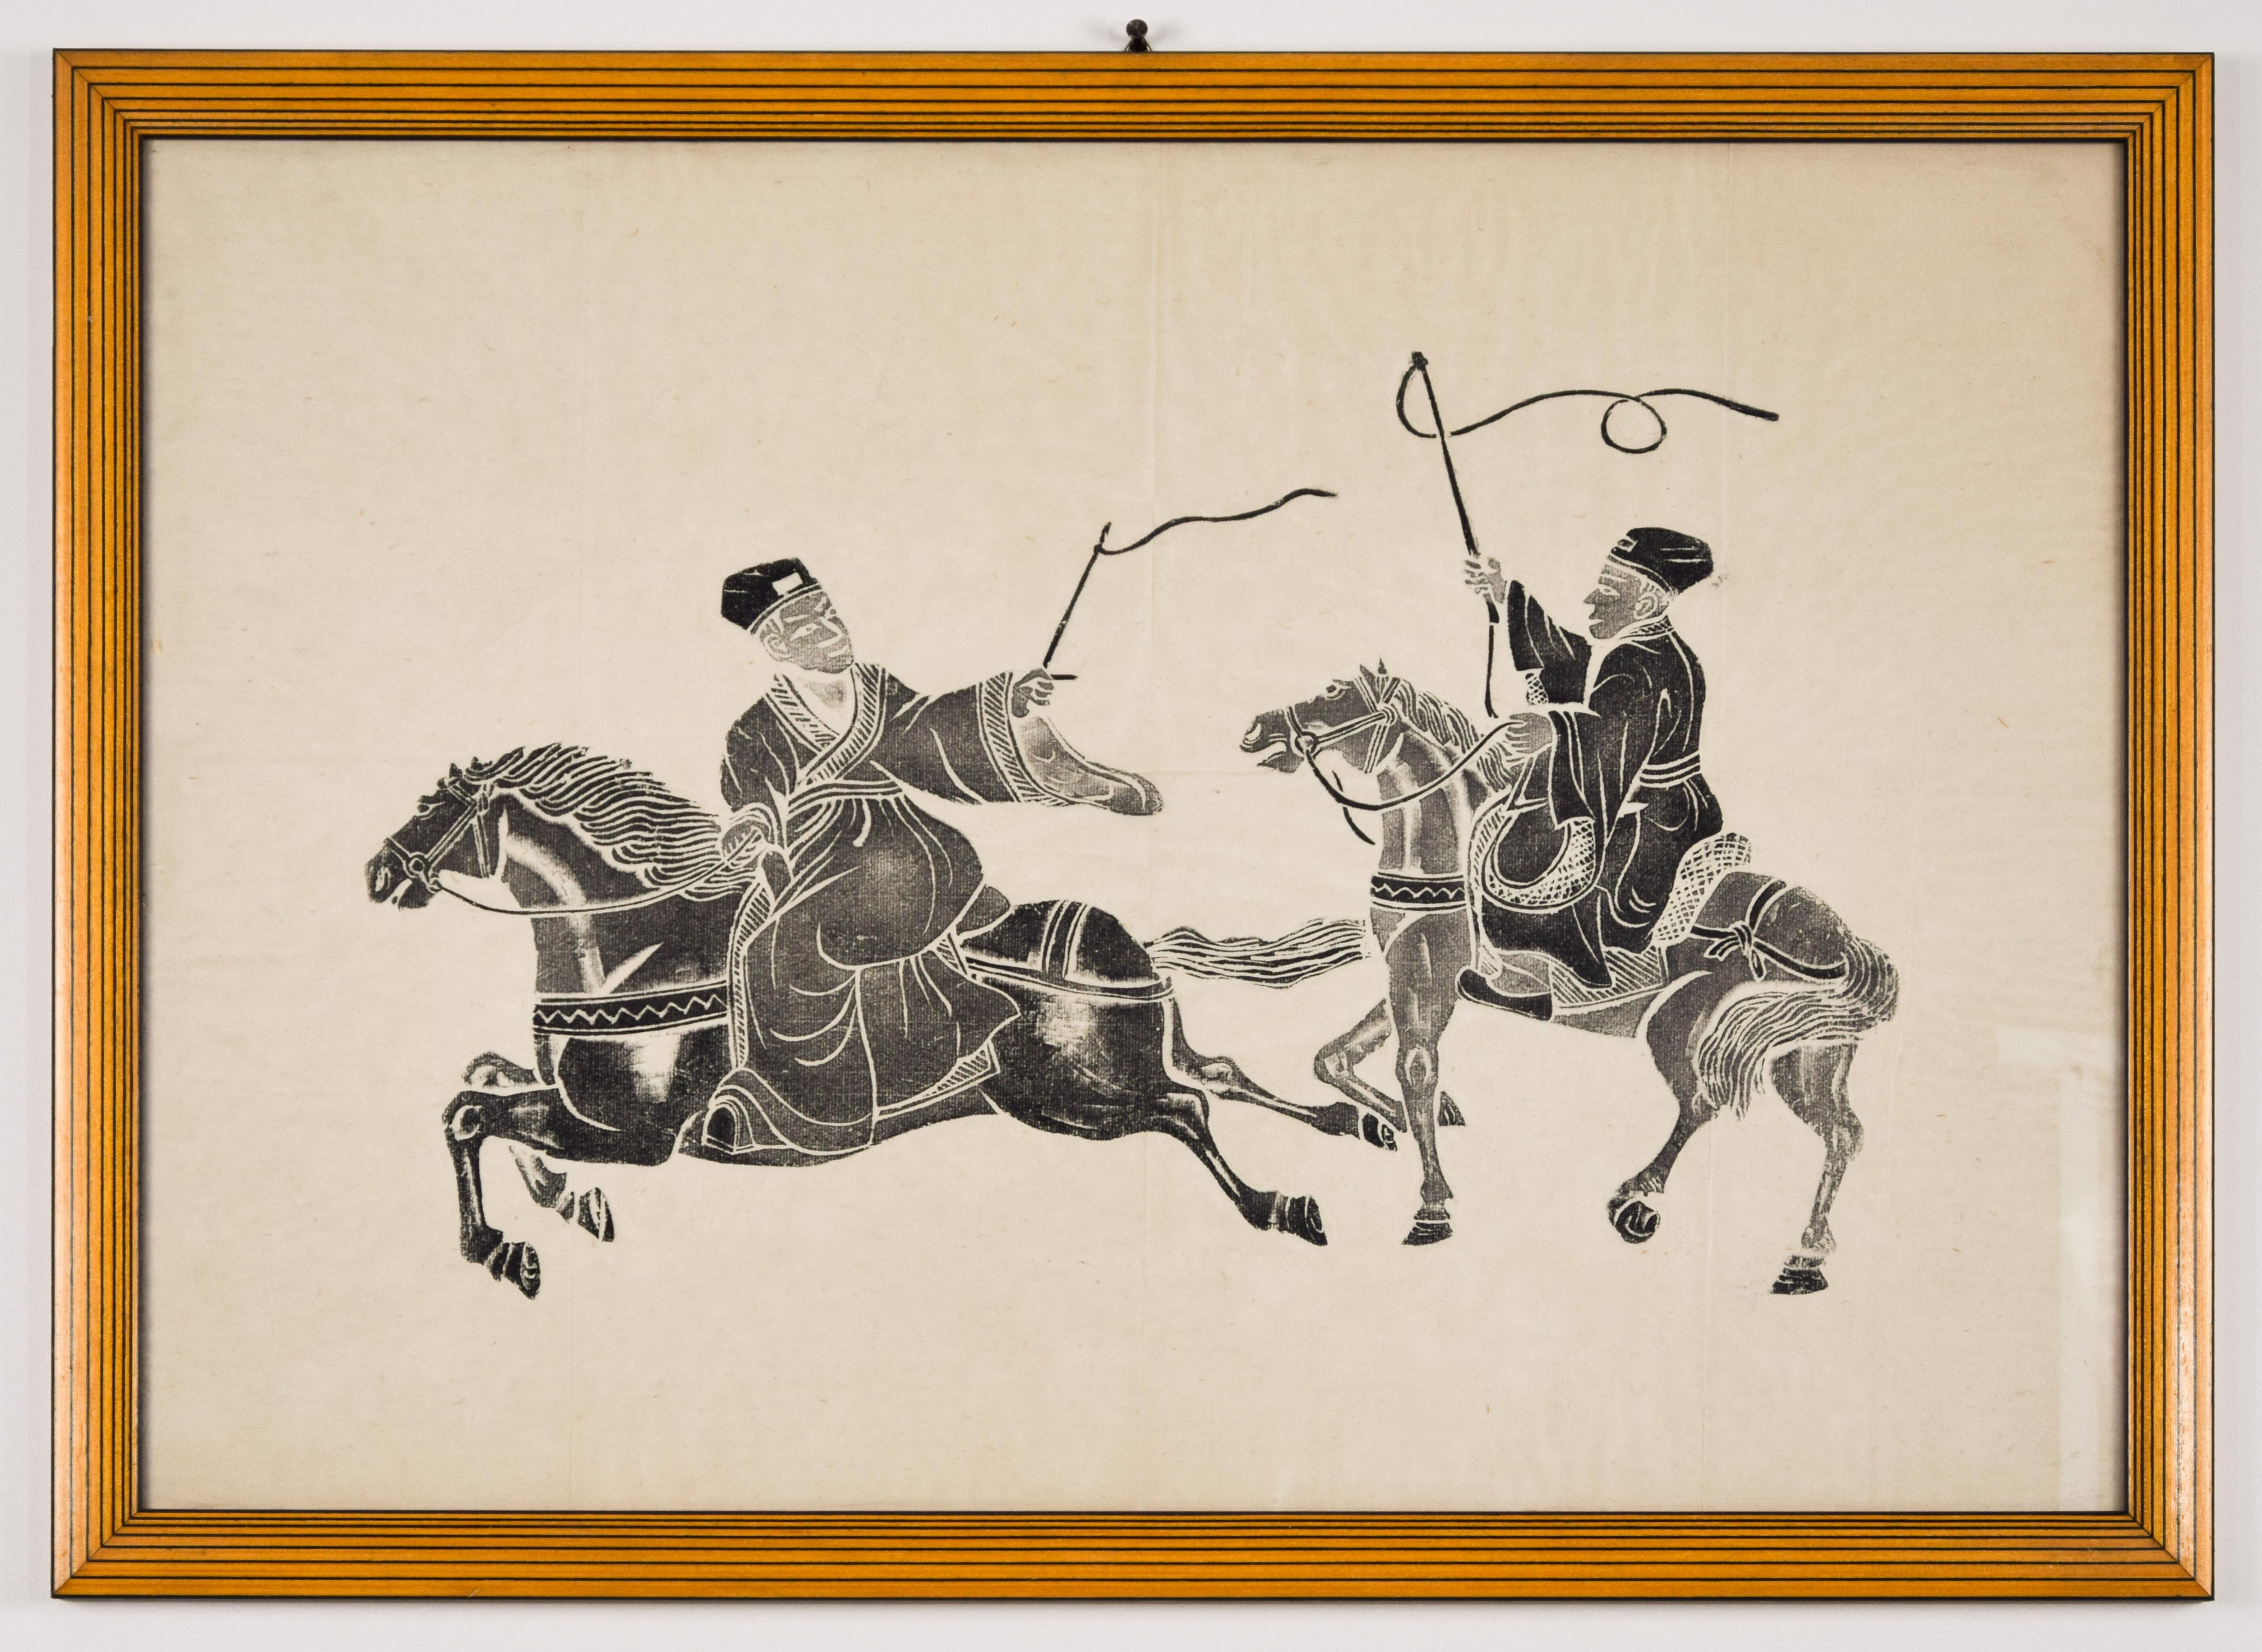 Unknown Figurative Print - Riders - Woodcut Early 20th Century